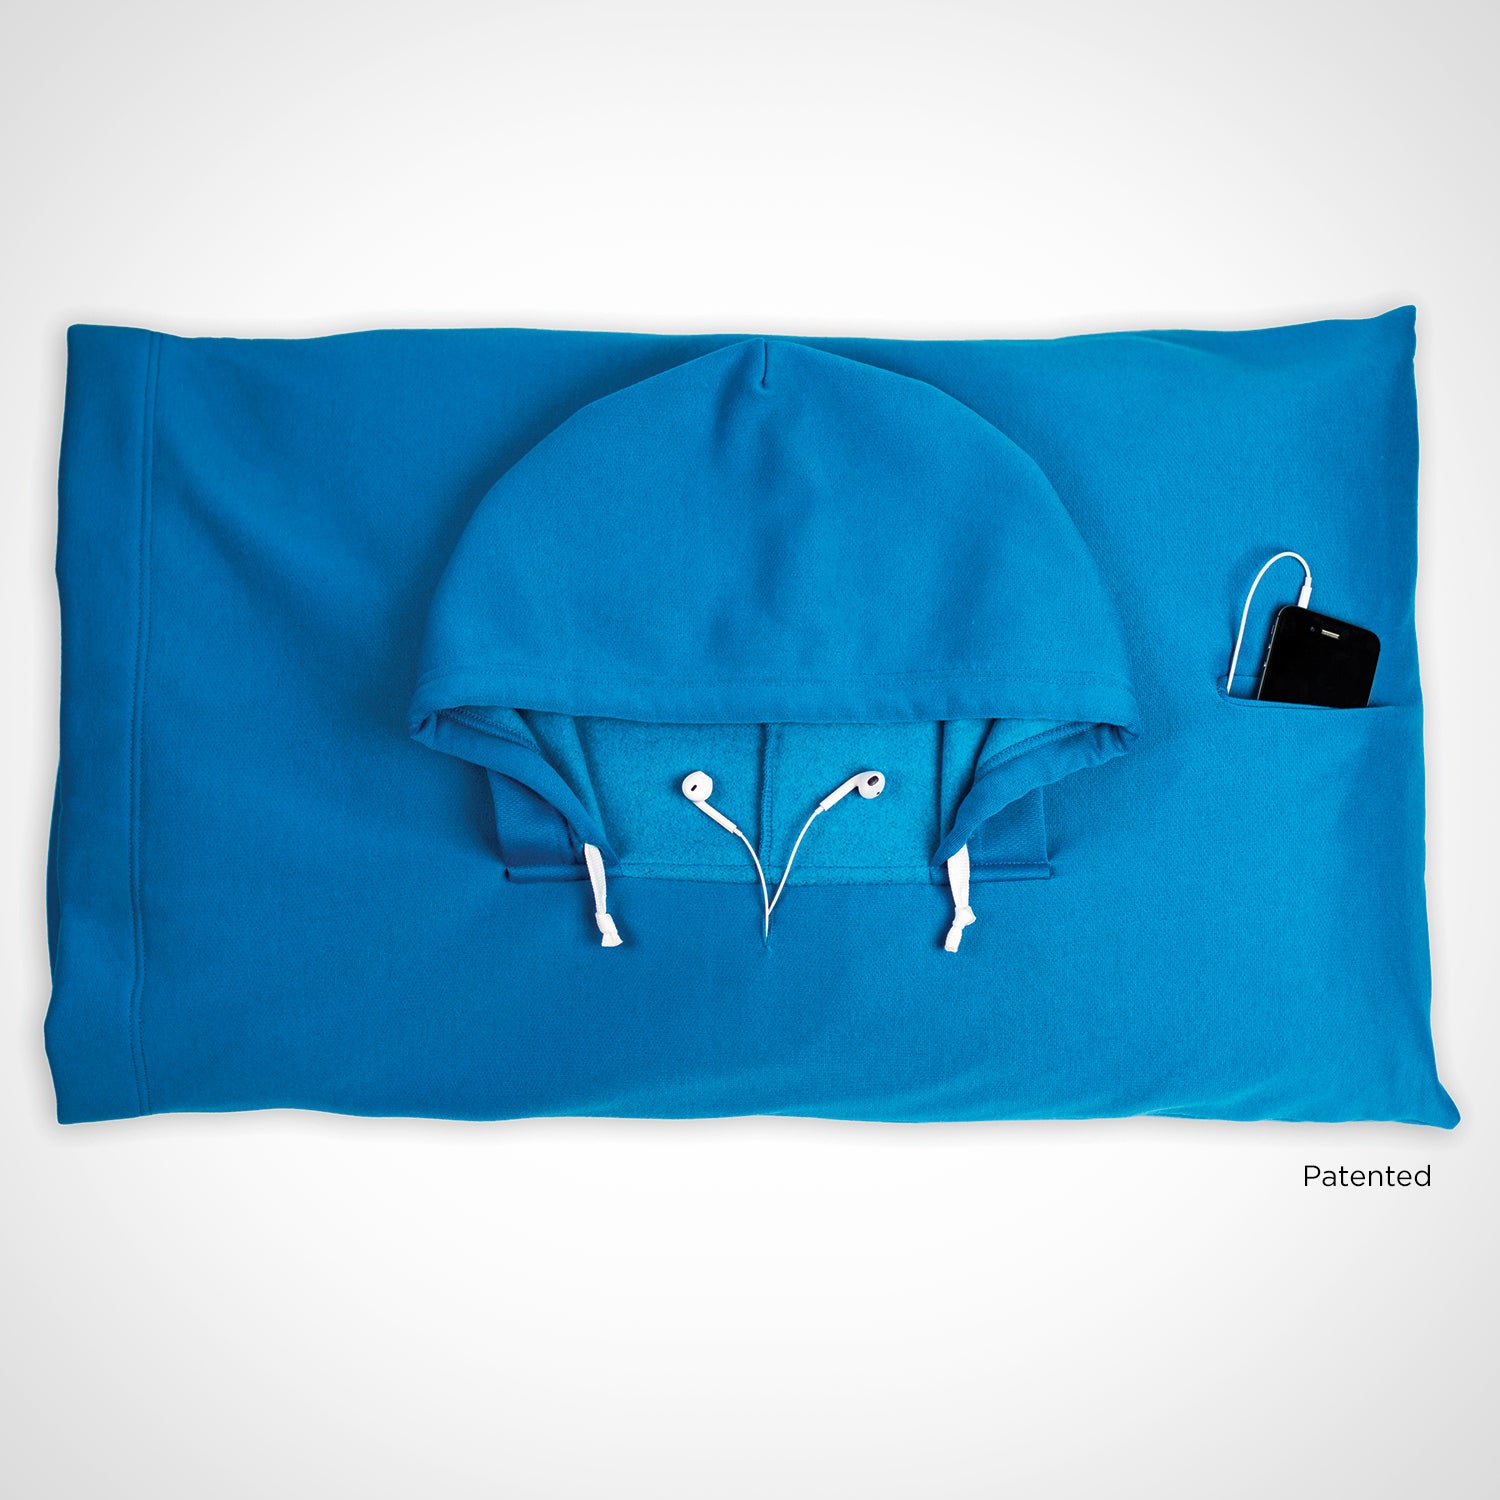 the hoodie pillow